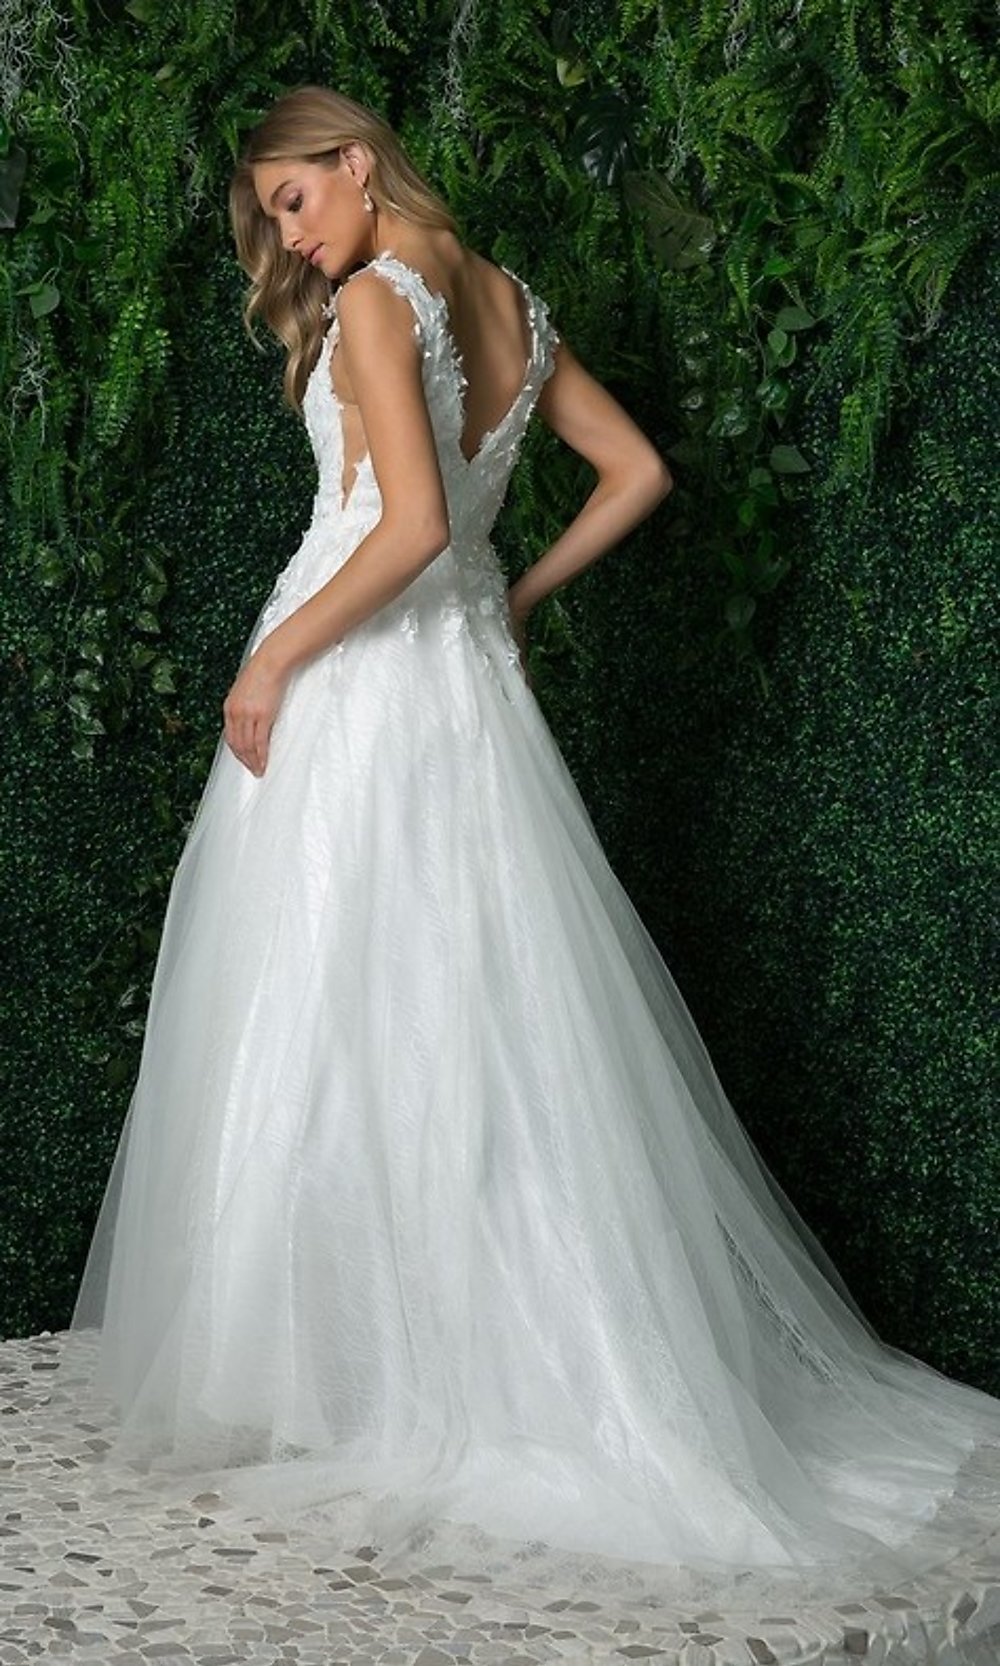  Long White Ball Gown with Floral Appliques